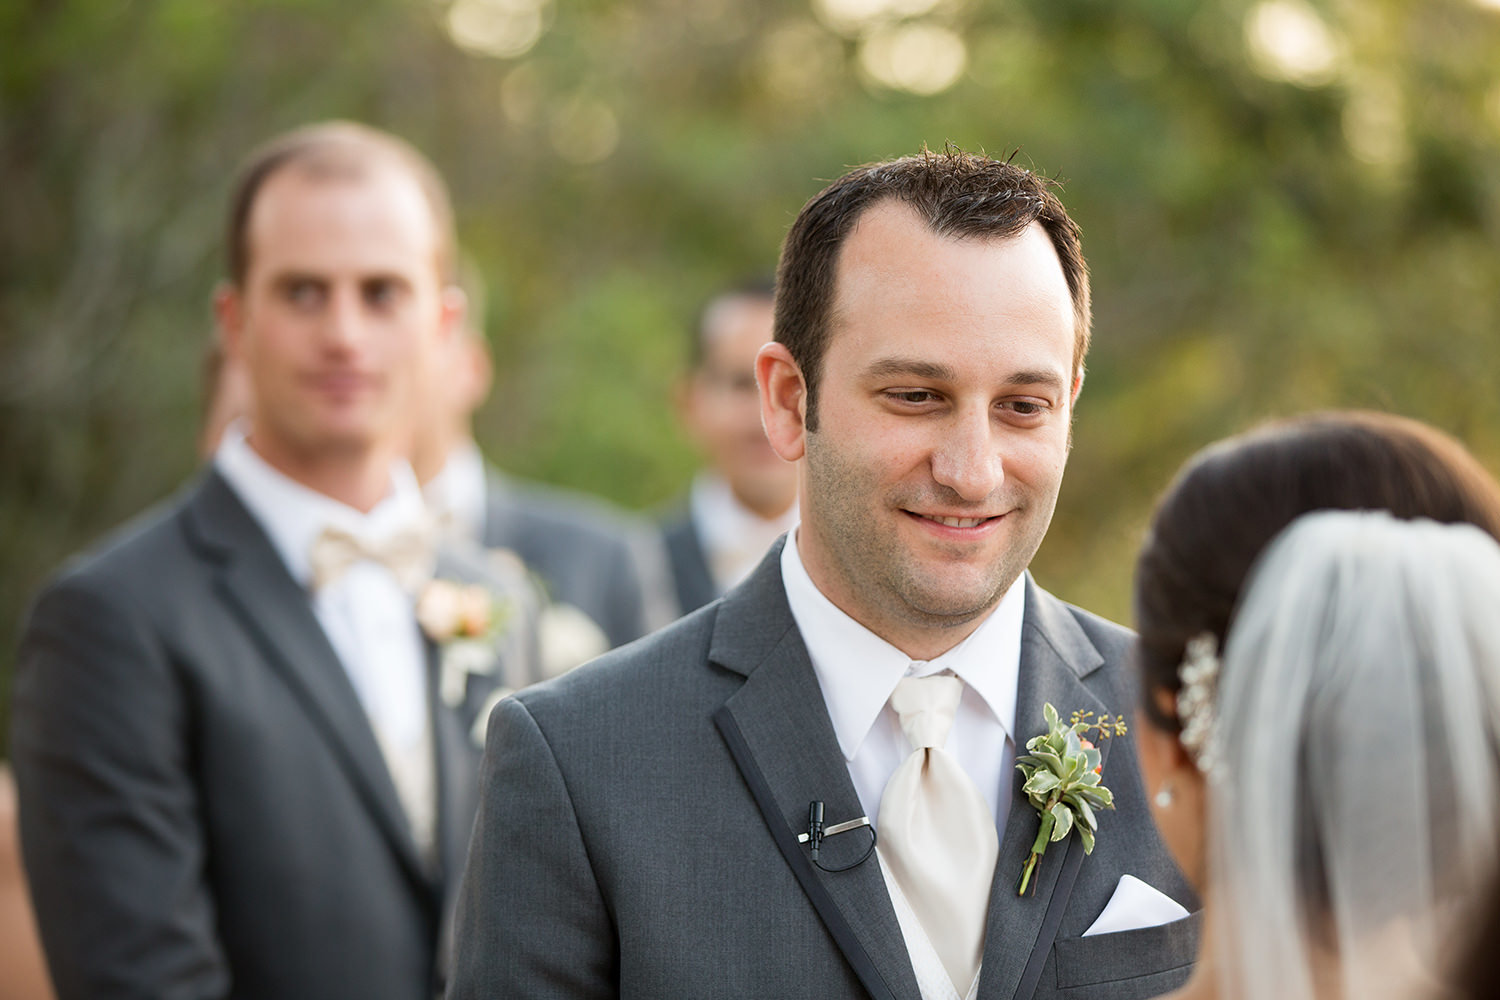 Groom at a wedding says his vows